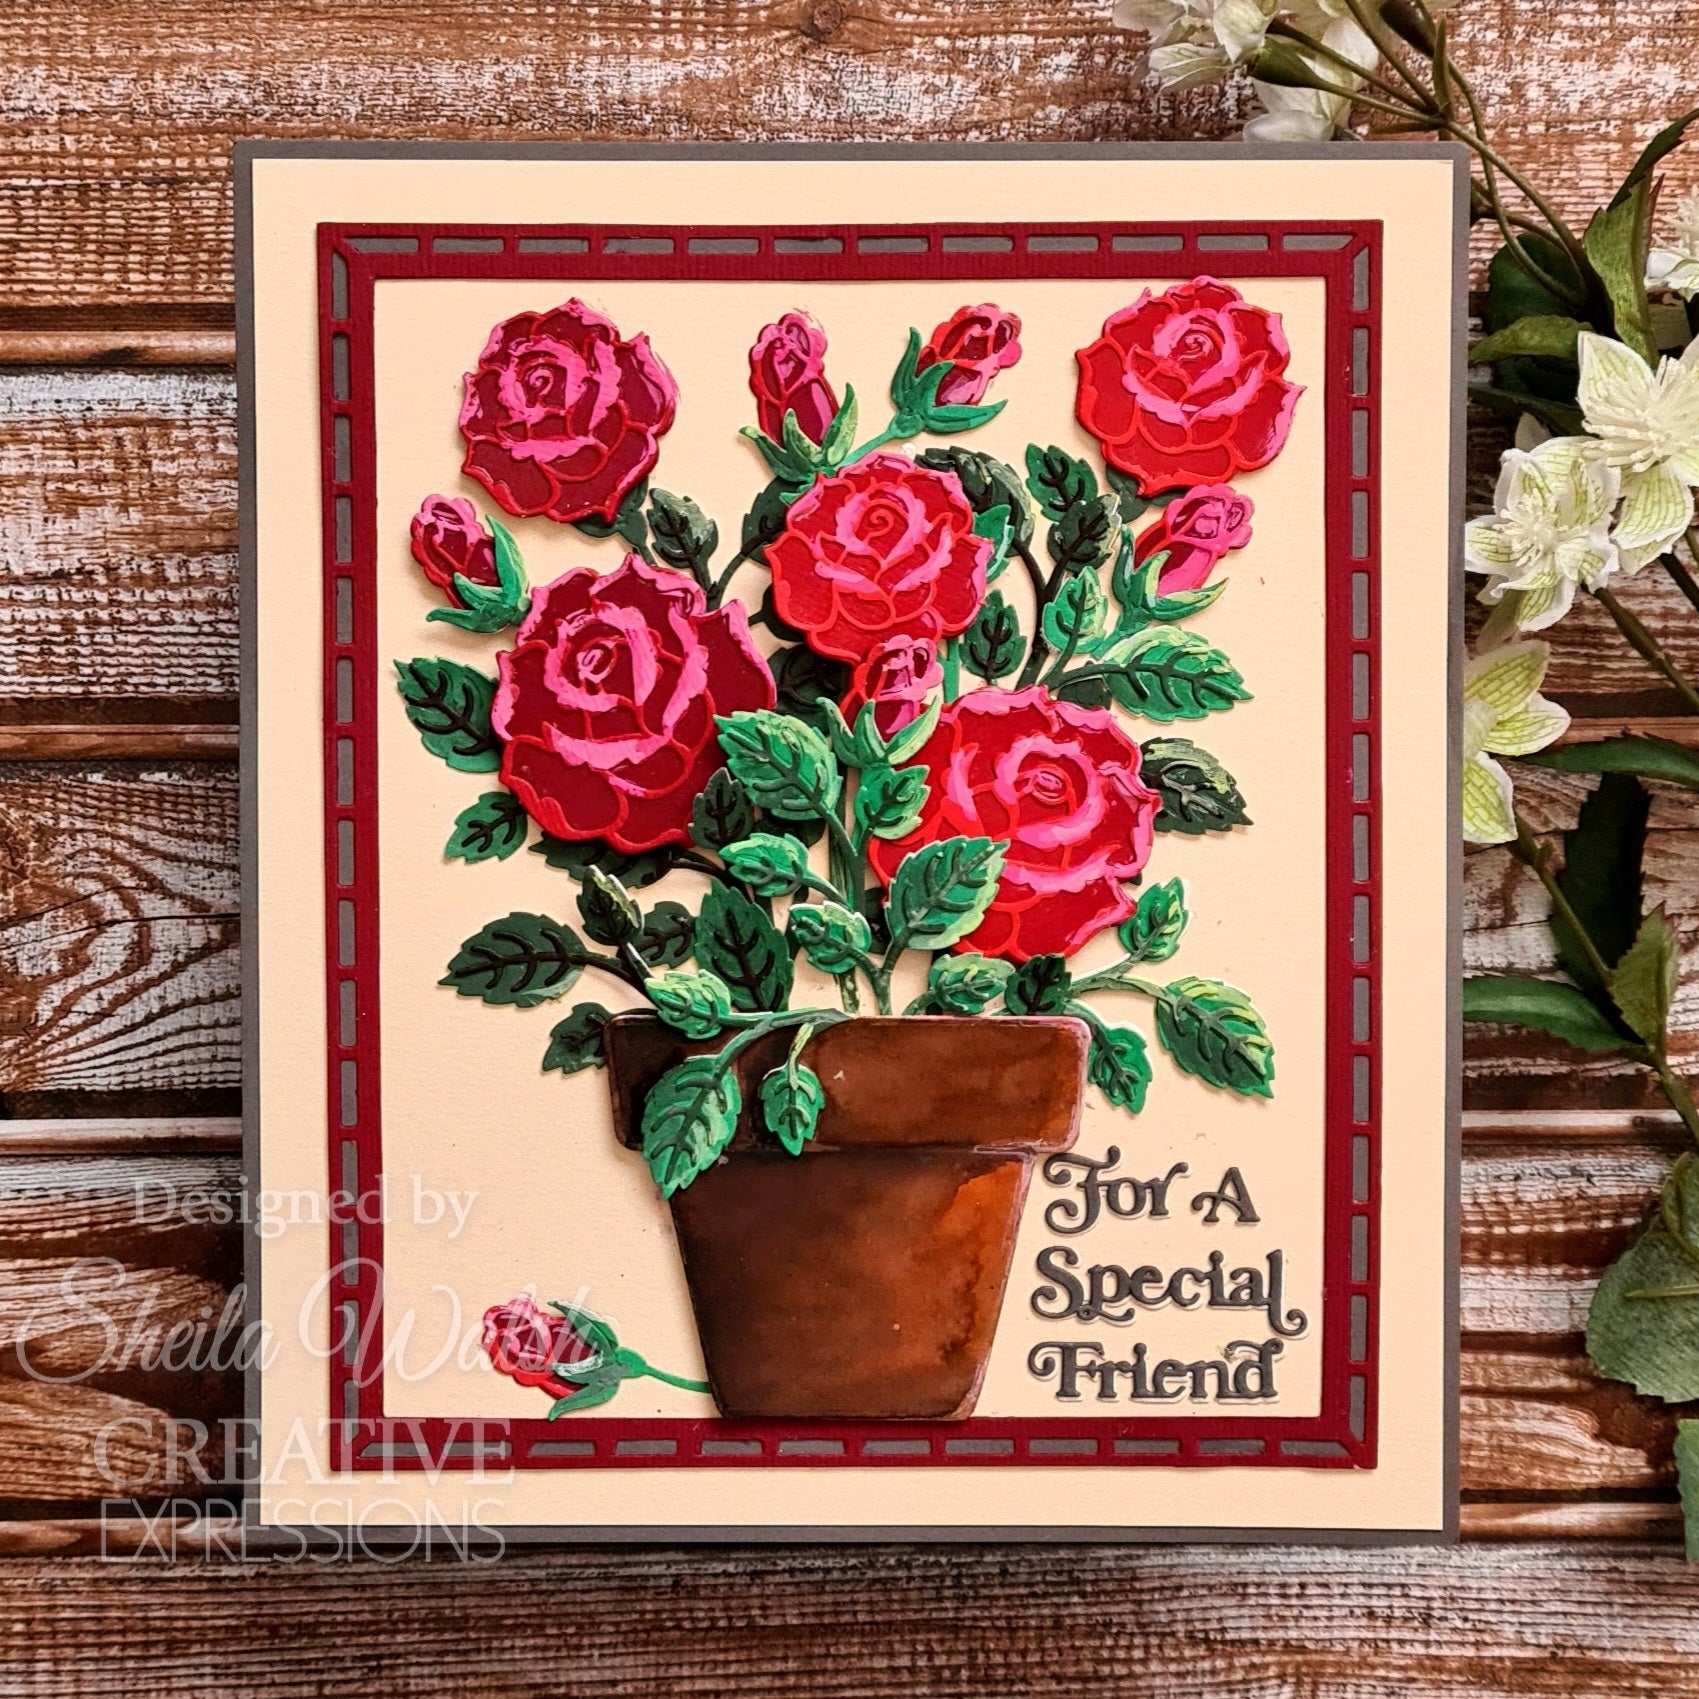 Creative Expressions Sue Wilson Mini Shadowed Sentiments For A Special Friend Craft Die